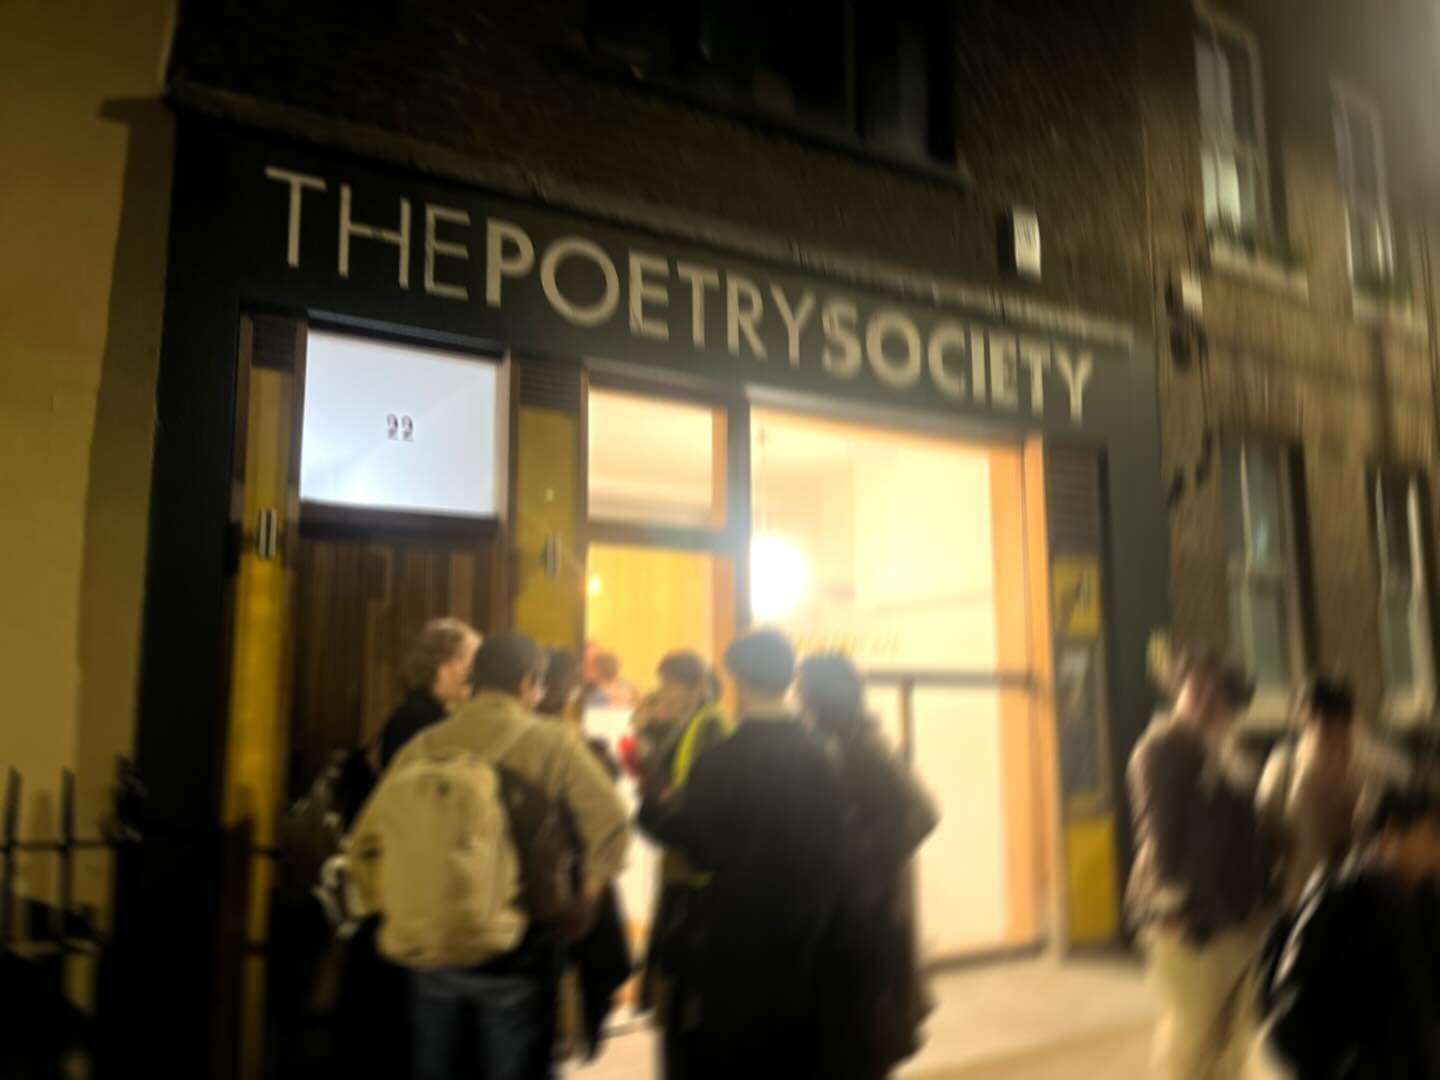 I can&rsquo;t believe I read at The Poetry Caf&eacute; in Covent Garden! 

Thanks @brookespoetry, @thepoetrysociety  @poetrycafelondon. Massive congrats to @eric.ycw and @eiramurphy on their stunning work.